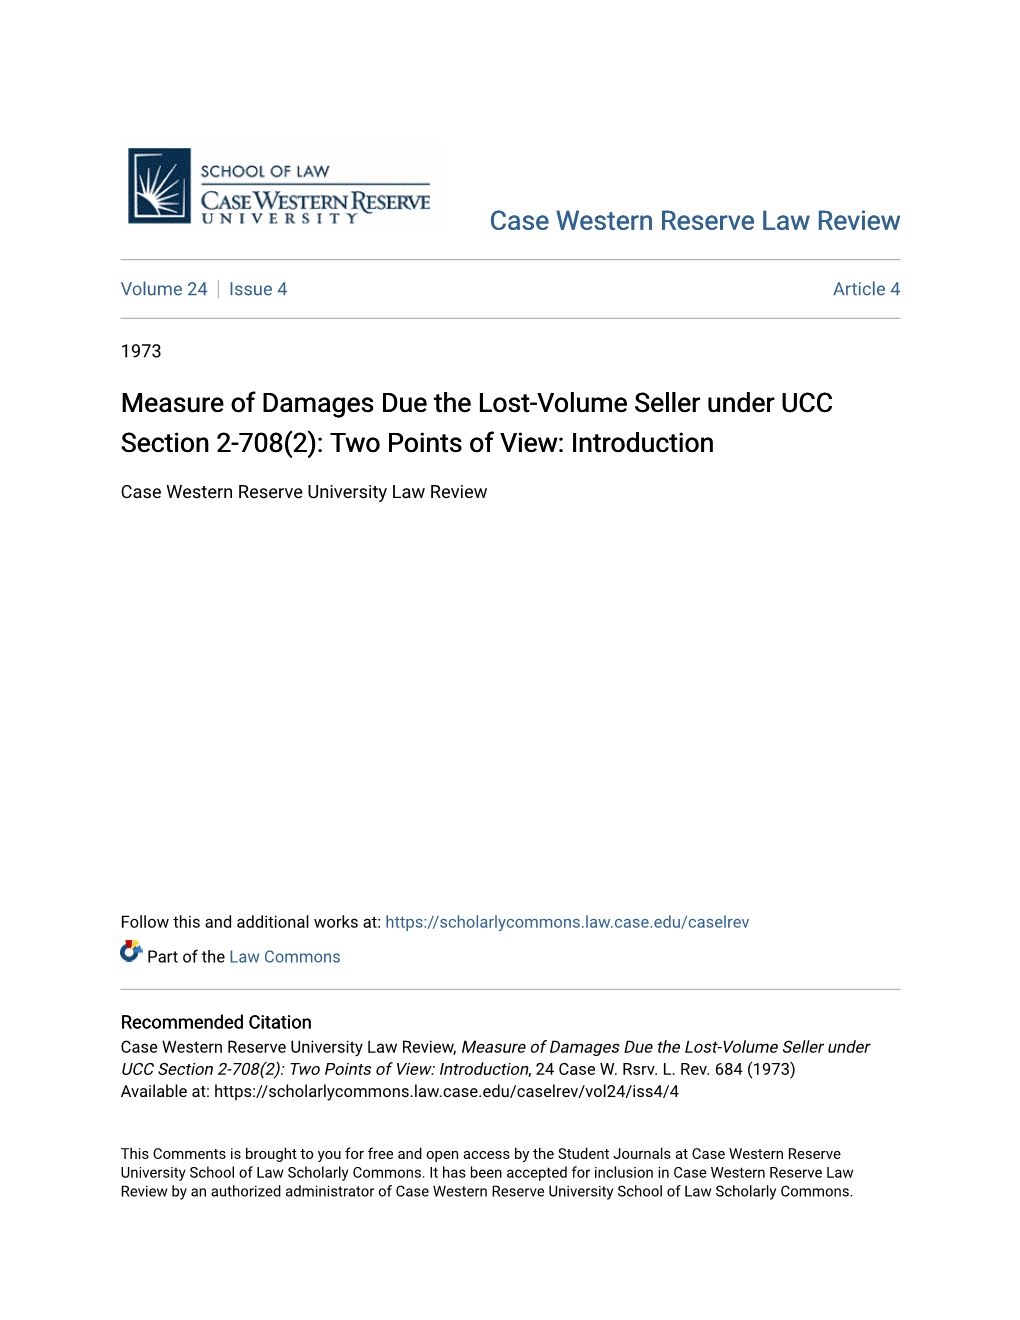 Measure of Damages Due the Lost-Volume Seller Under UCC Section 2-708(2): Two Points of View: Introduction